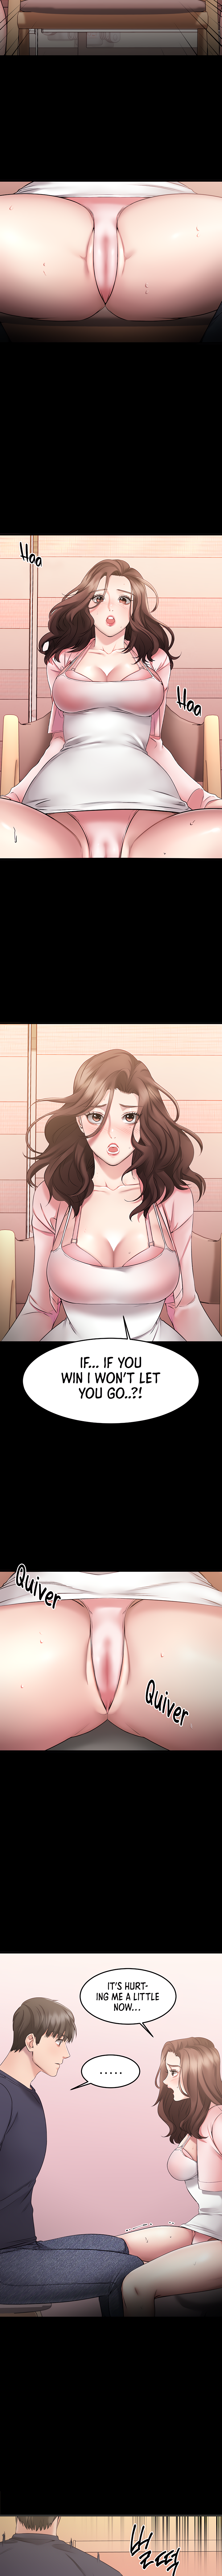 my-female-friend-who-crossed-the-line-chap-3-7